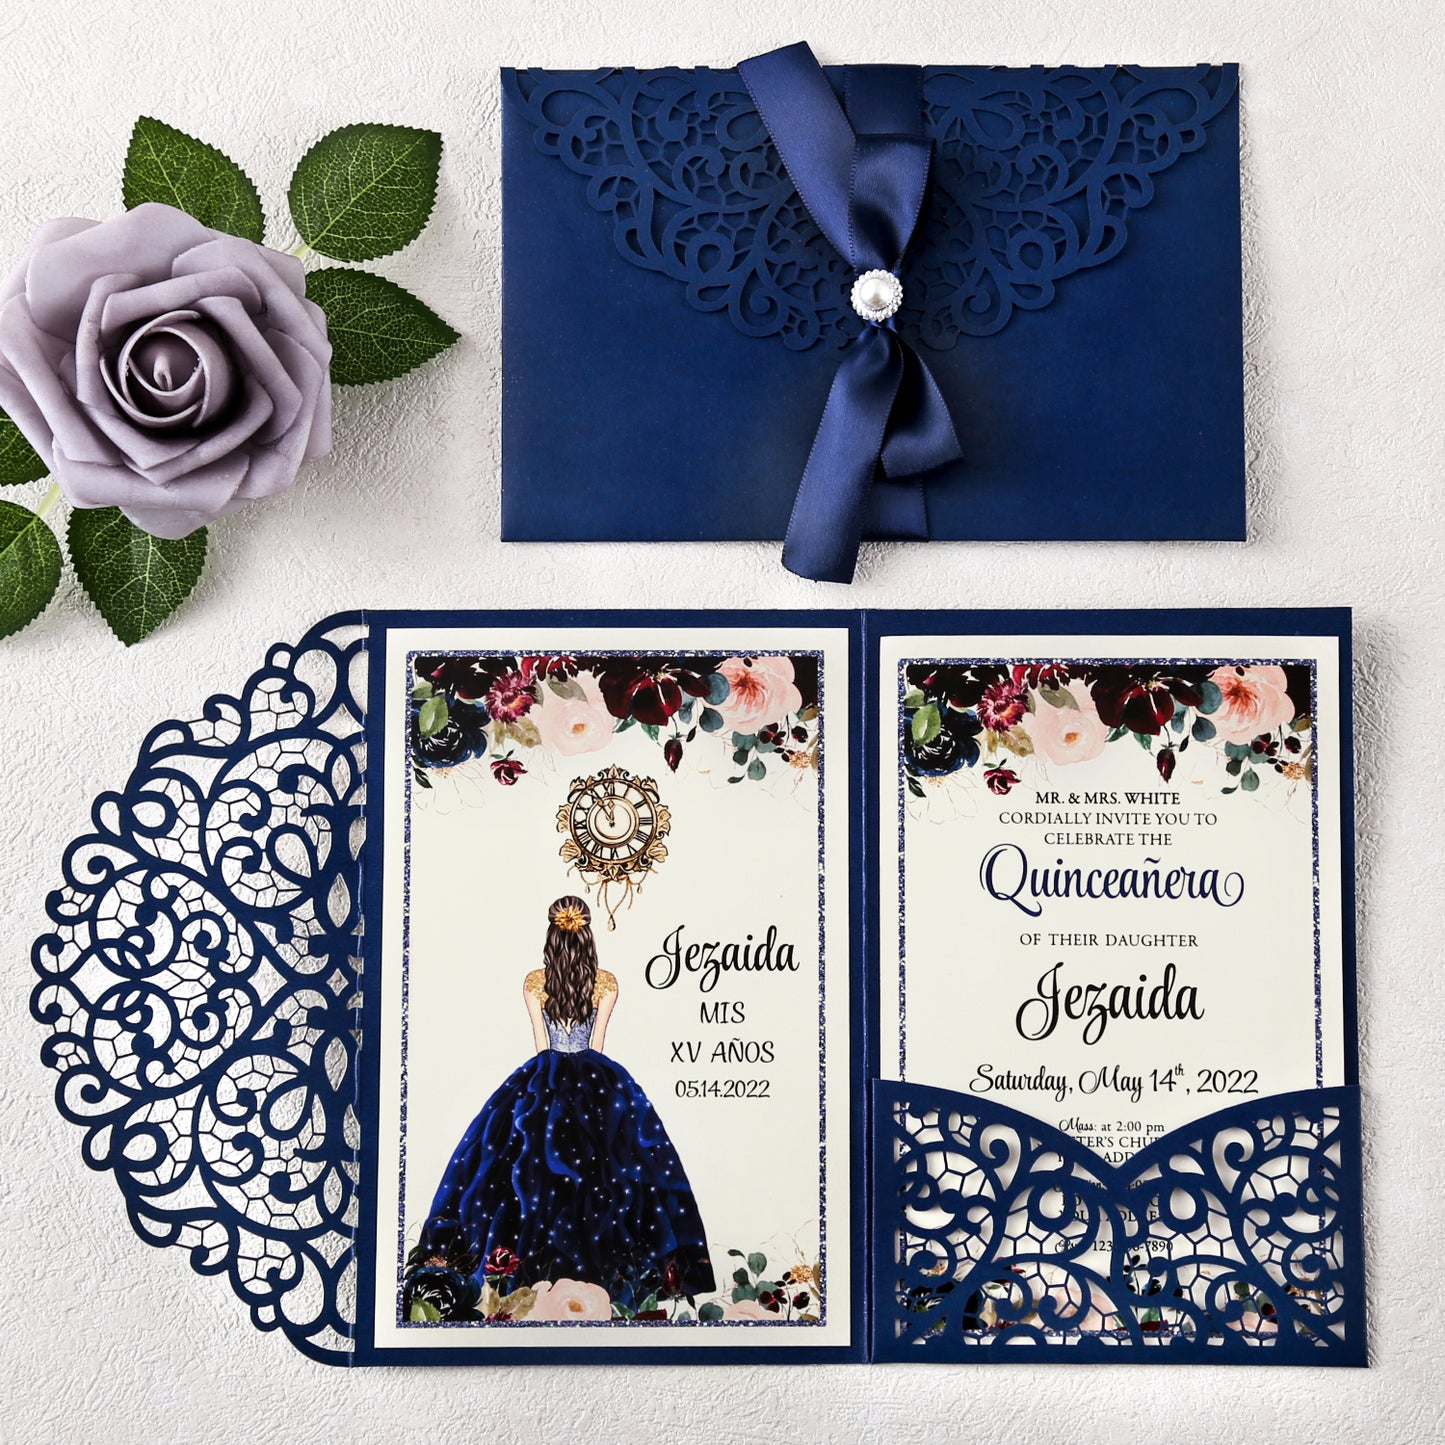 4.7 x7 inch Blue Laser Cut Hollow Rose Quinceanera Invitations Cards with Envelopes for Quinceanera Party